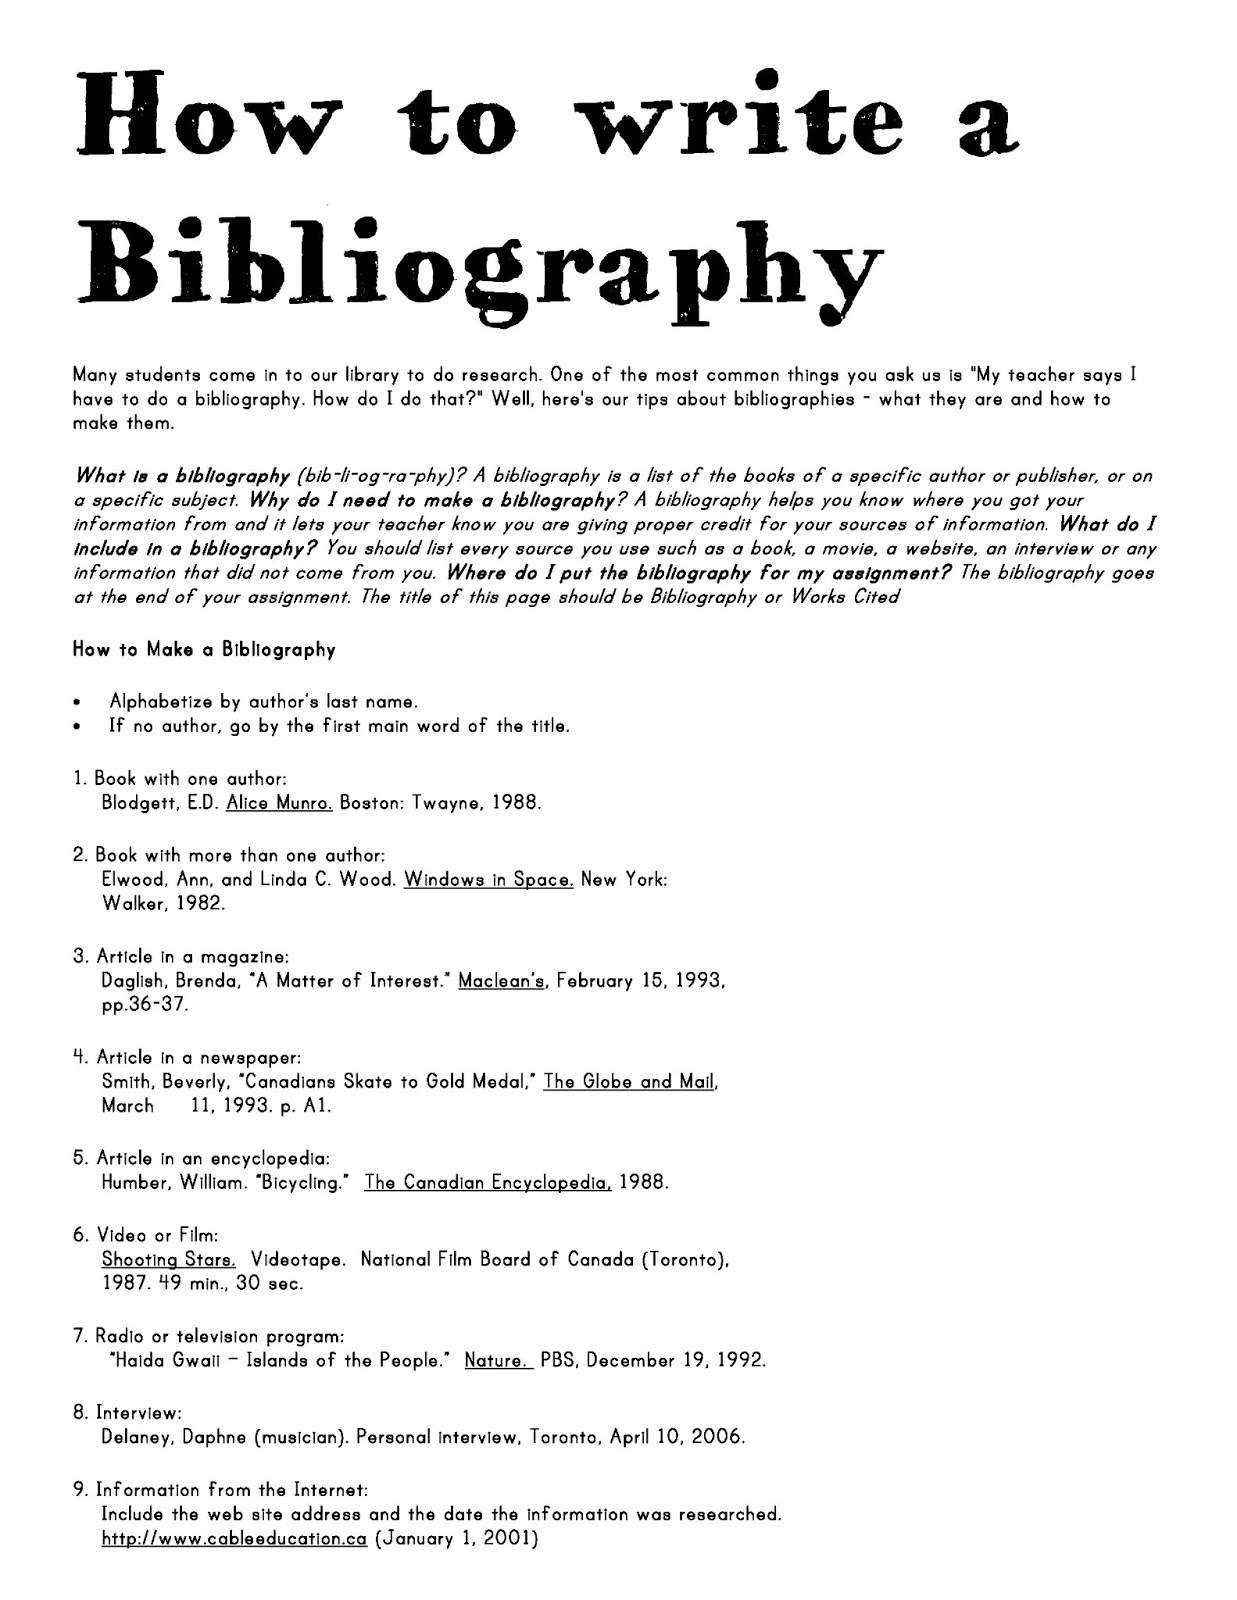 How to write a bibliography with two authors in one book